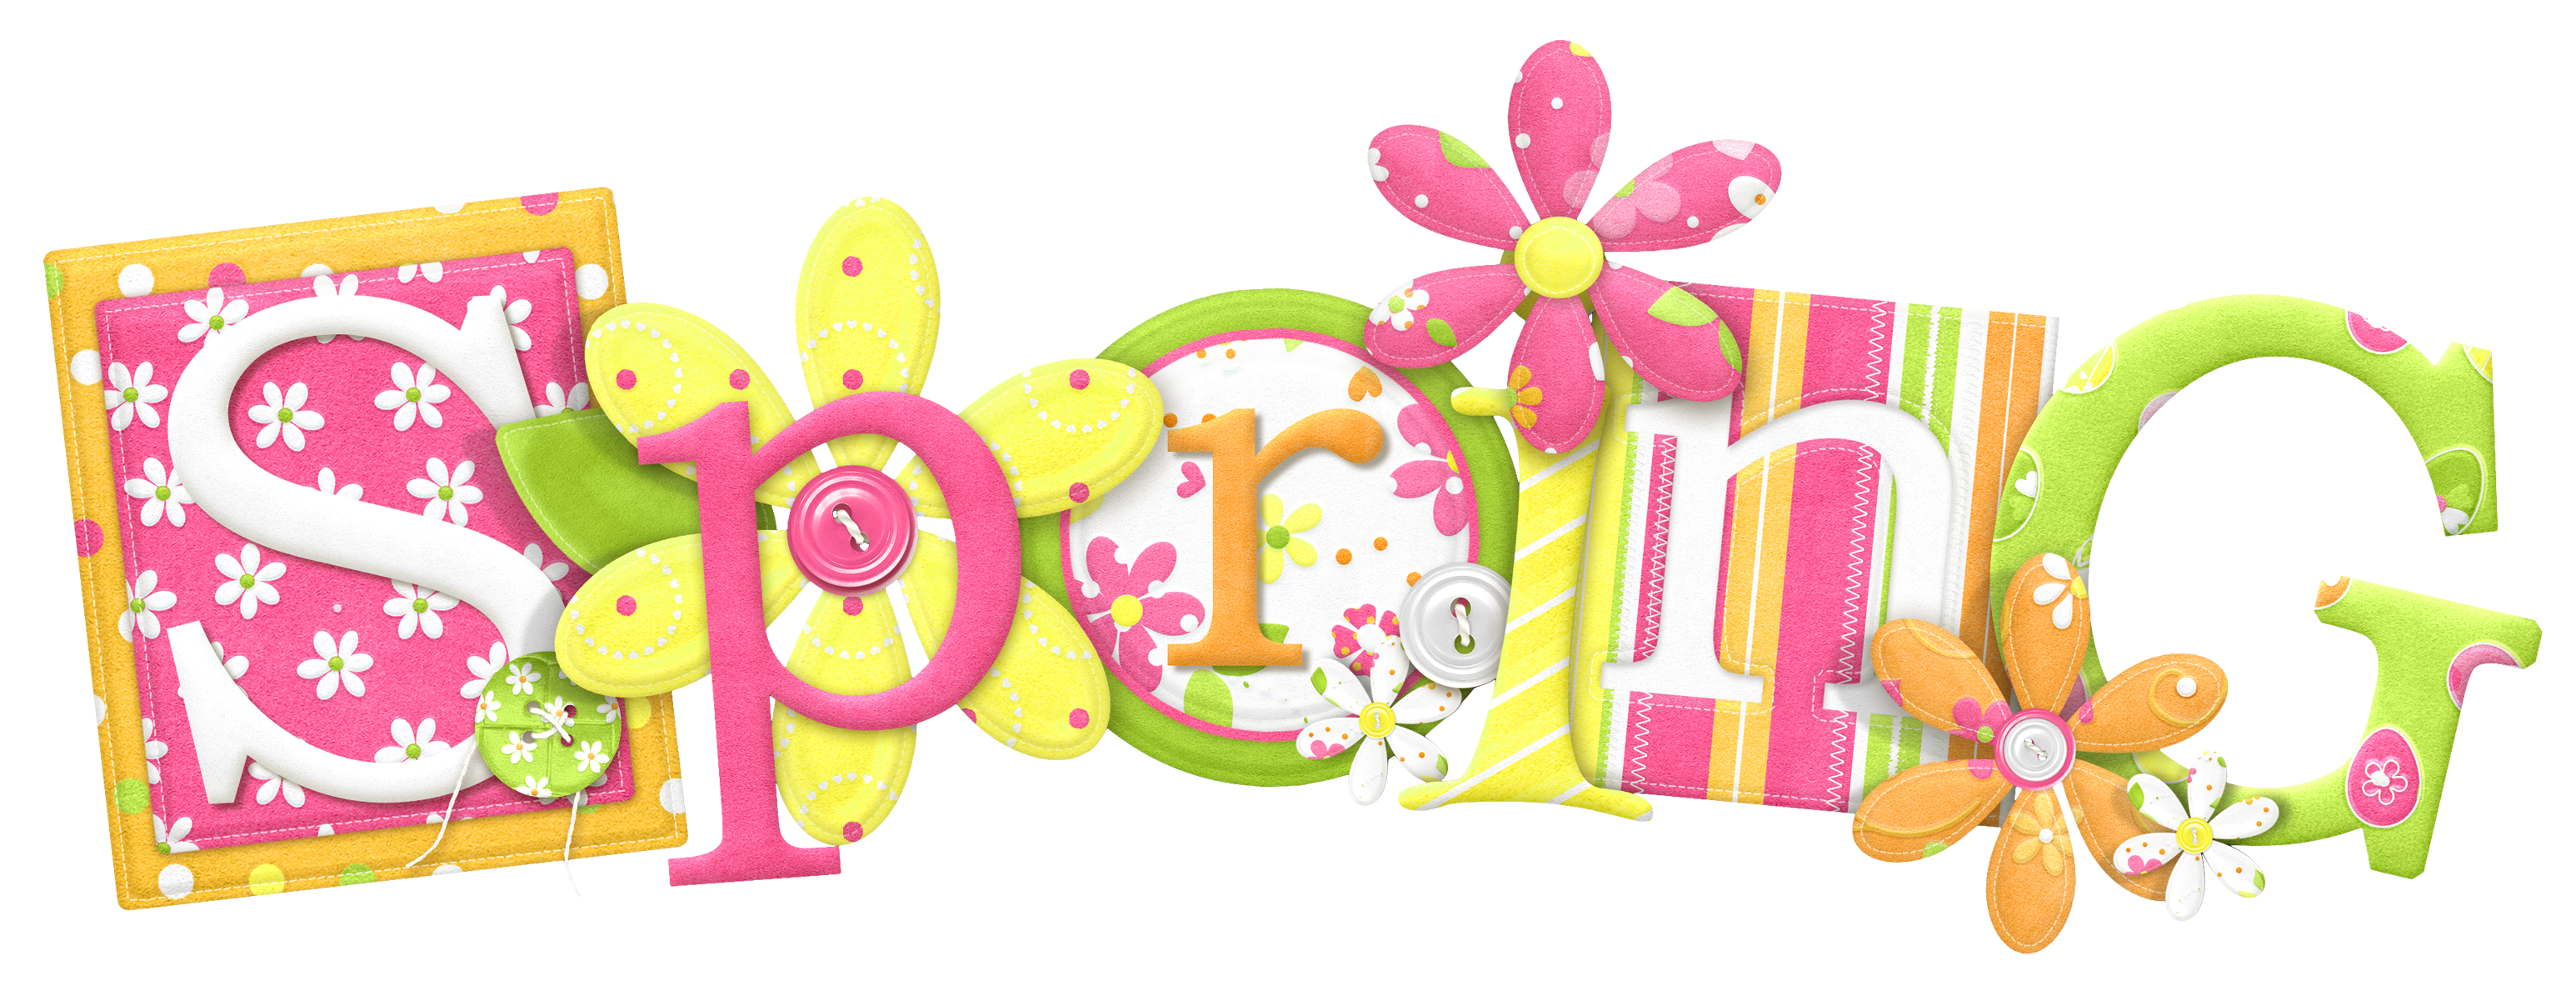 Free Happy Spring Cliparts, Download Free Clip Art, Free ...